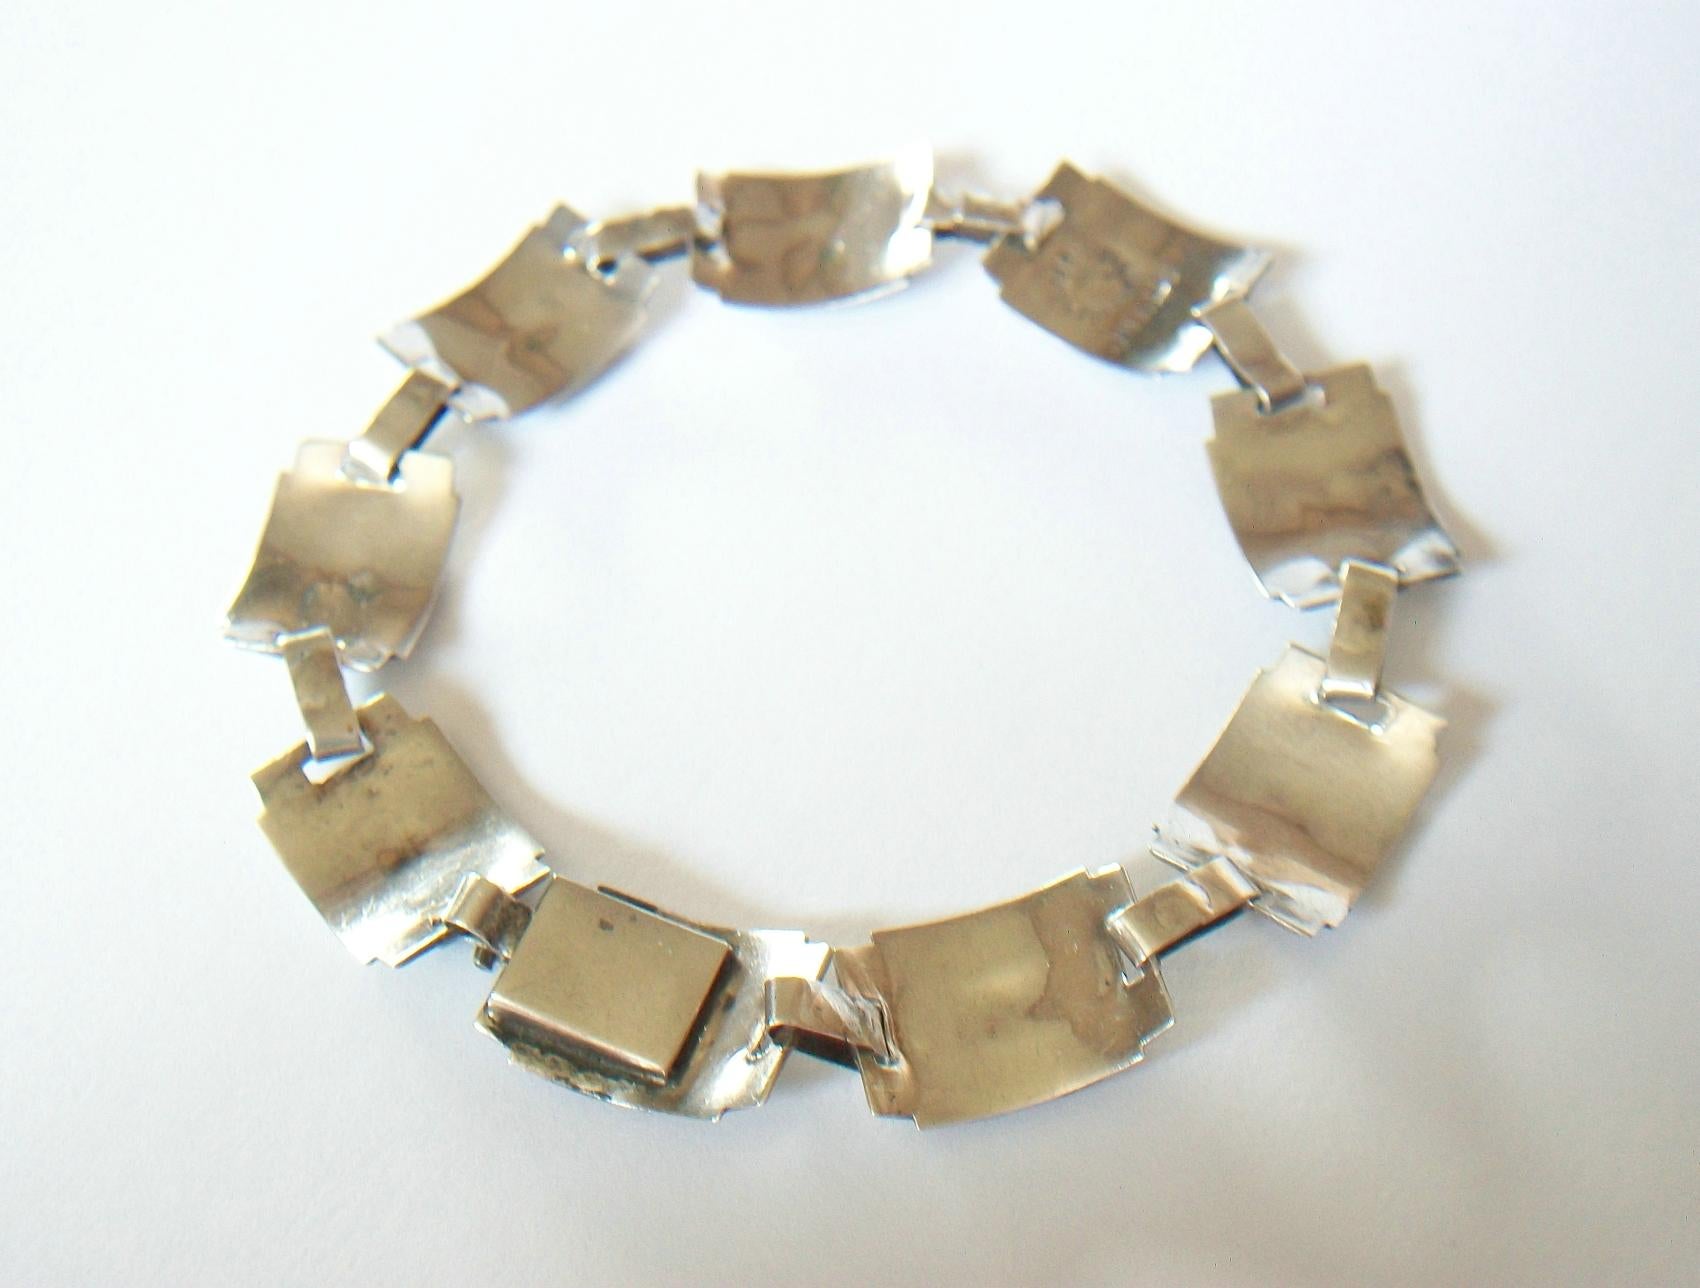 Modernist Sterling Silver & Abalone Link Bracelet - Mexico - Circa 1950's For Sale 4